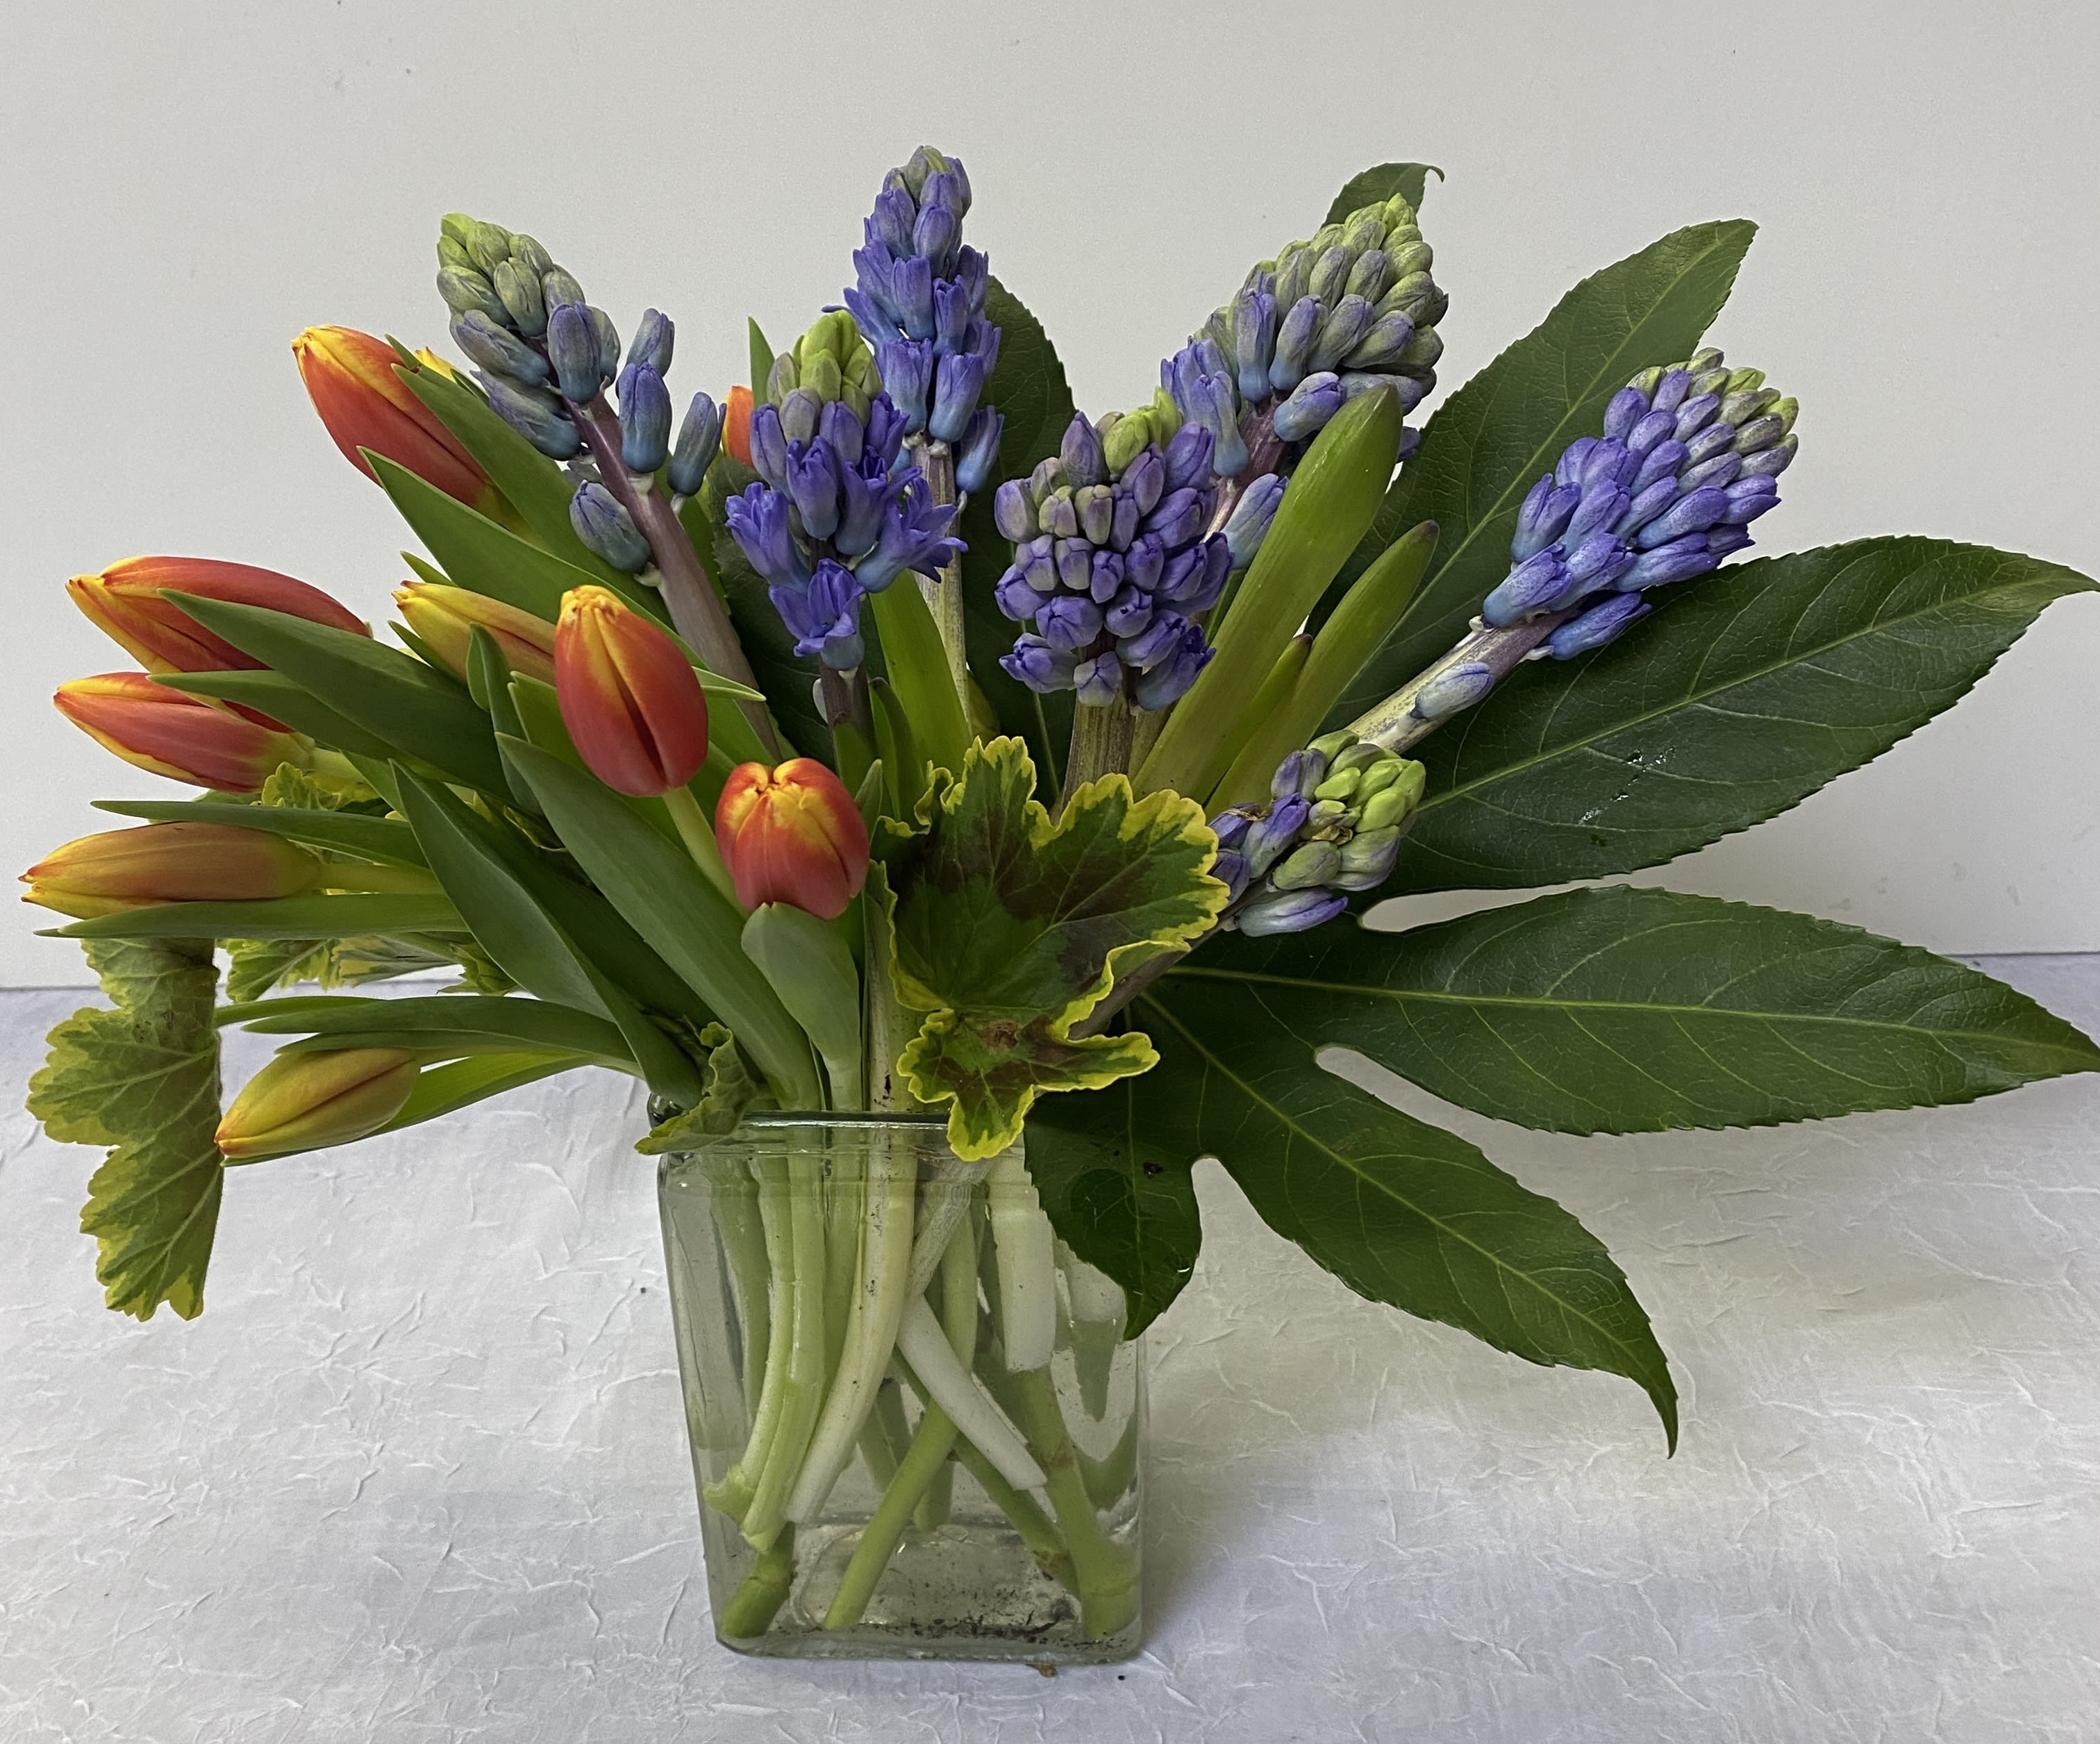 AMSTERDAM - Orange tulips and blue hyacinths in a glass vase with some greenery Colors maybe change